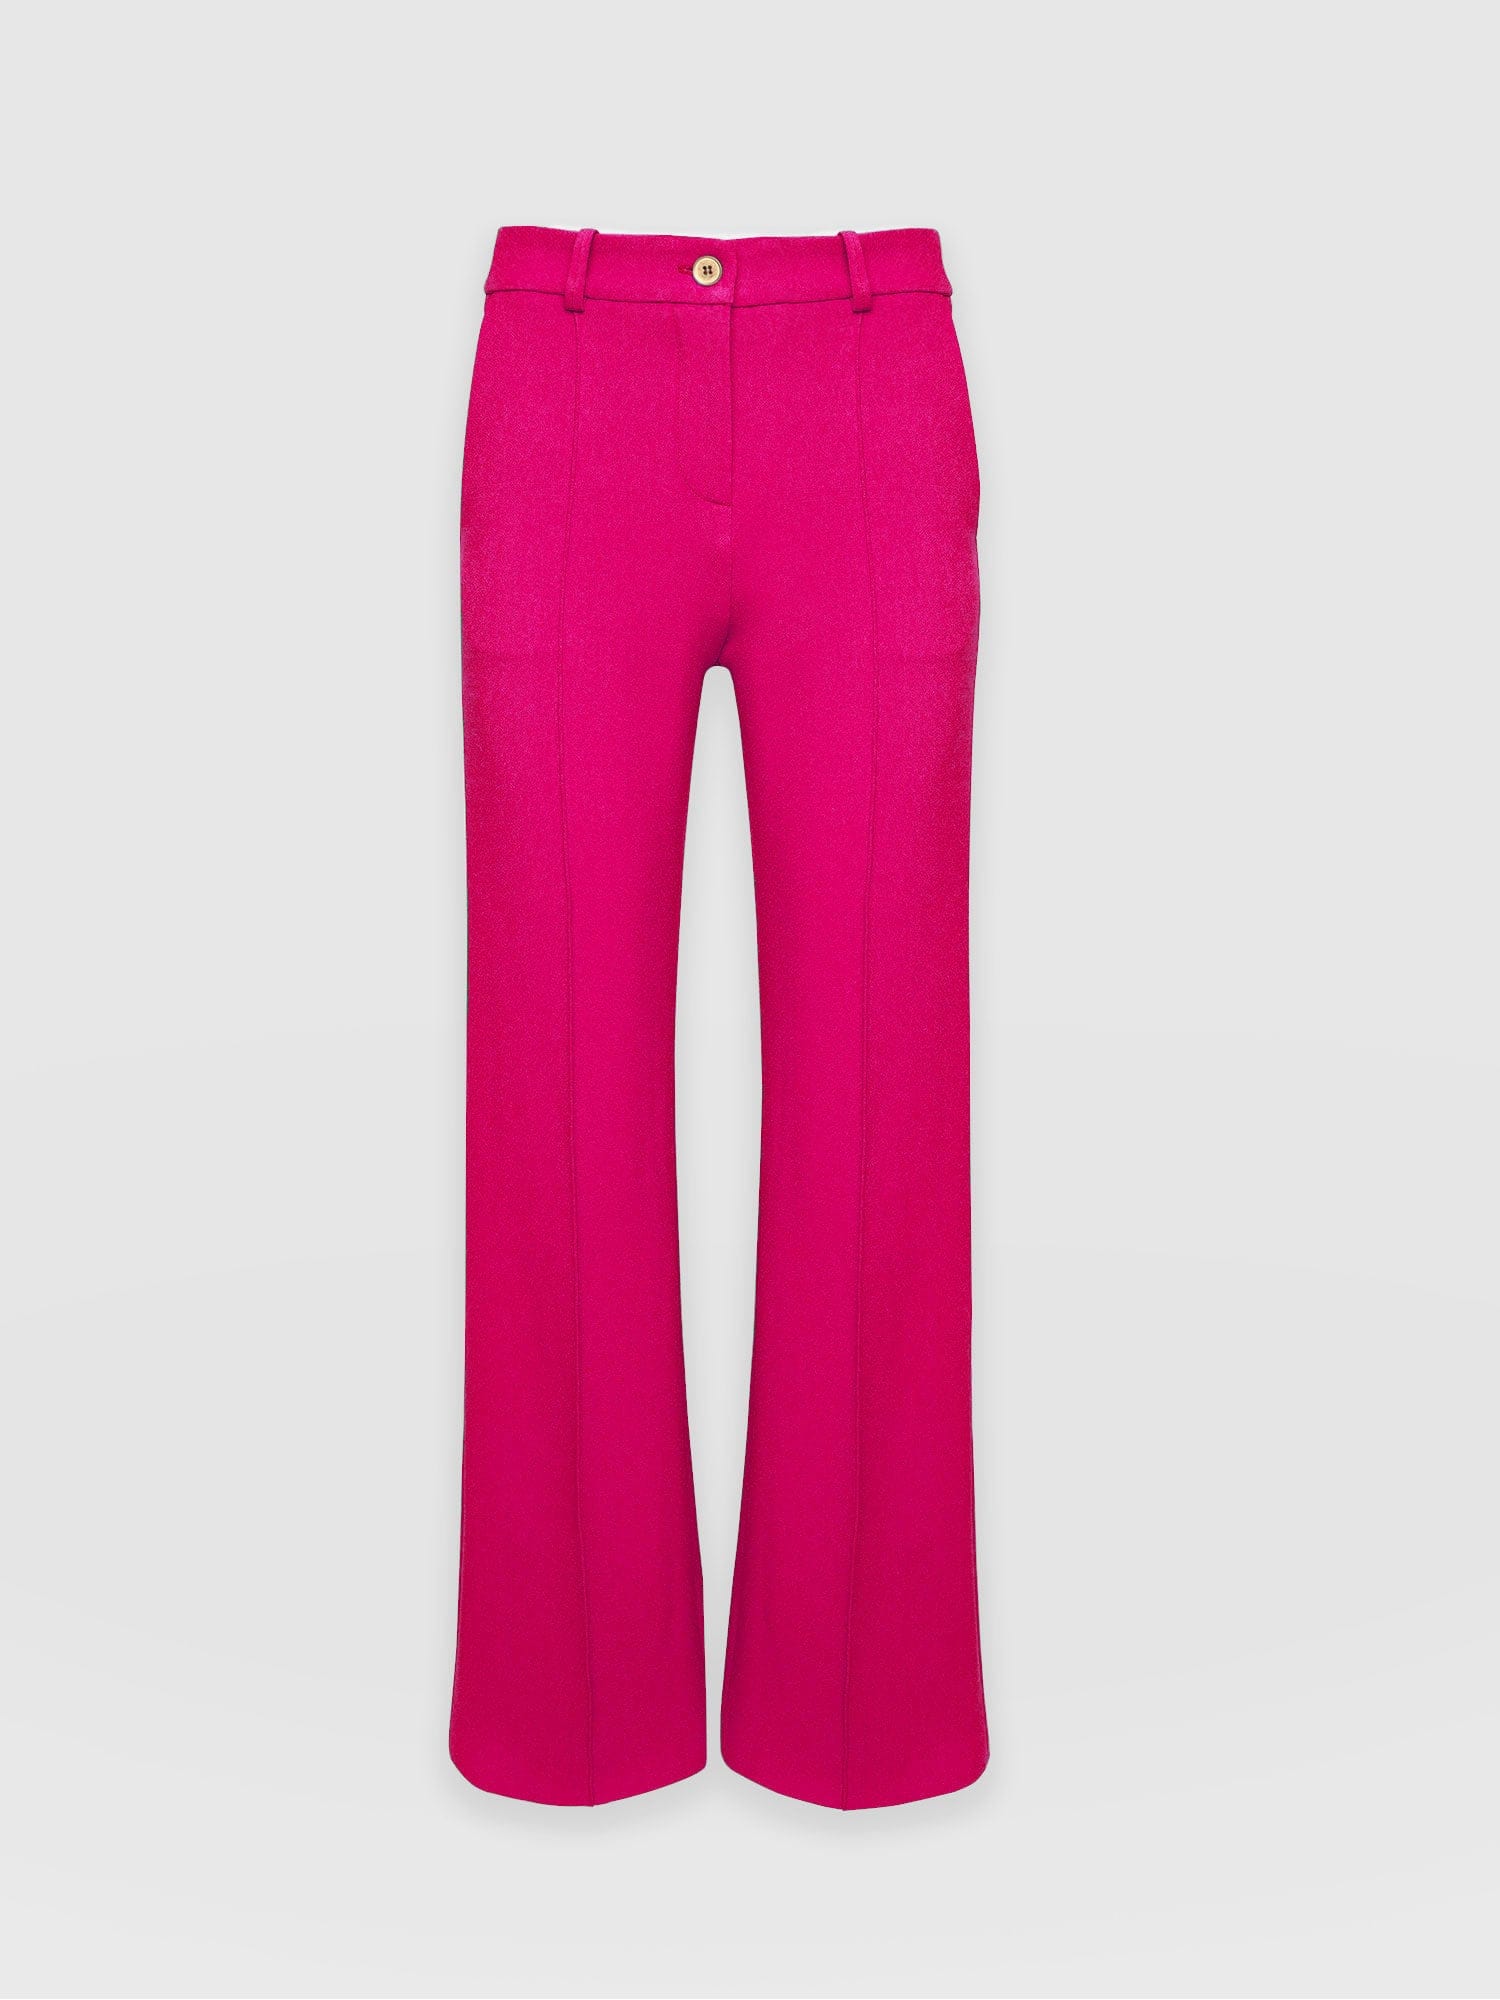 Sophie-in-pink-trousers – Sophie Robinson